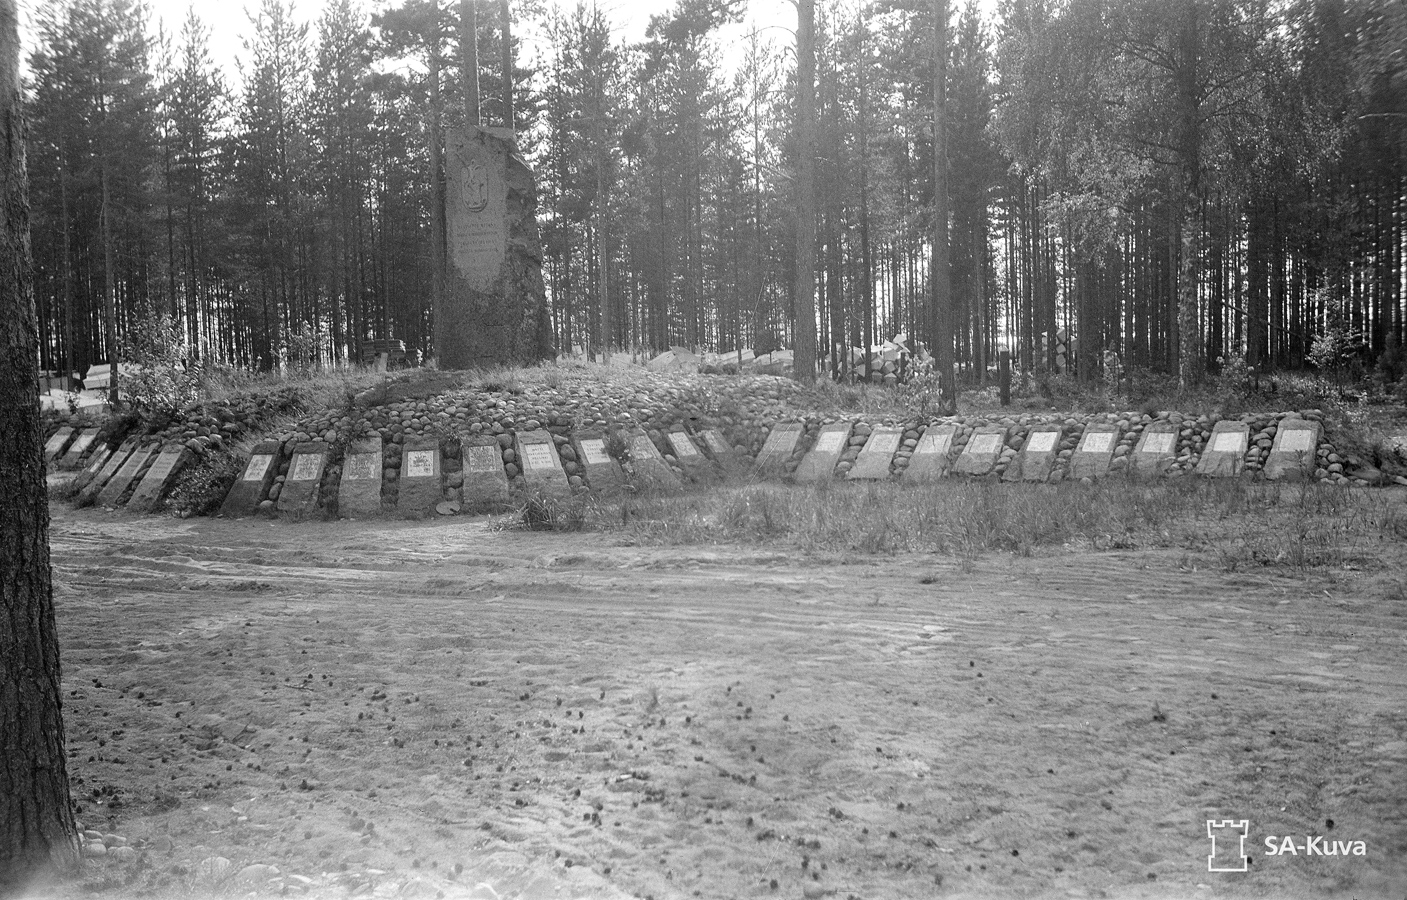 August 17, 1941. Tulema. Monument to the Fallen in Olonets expedition